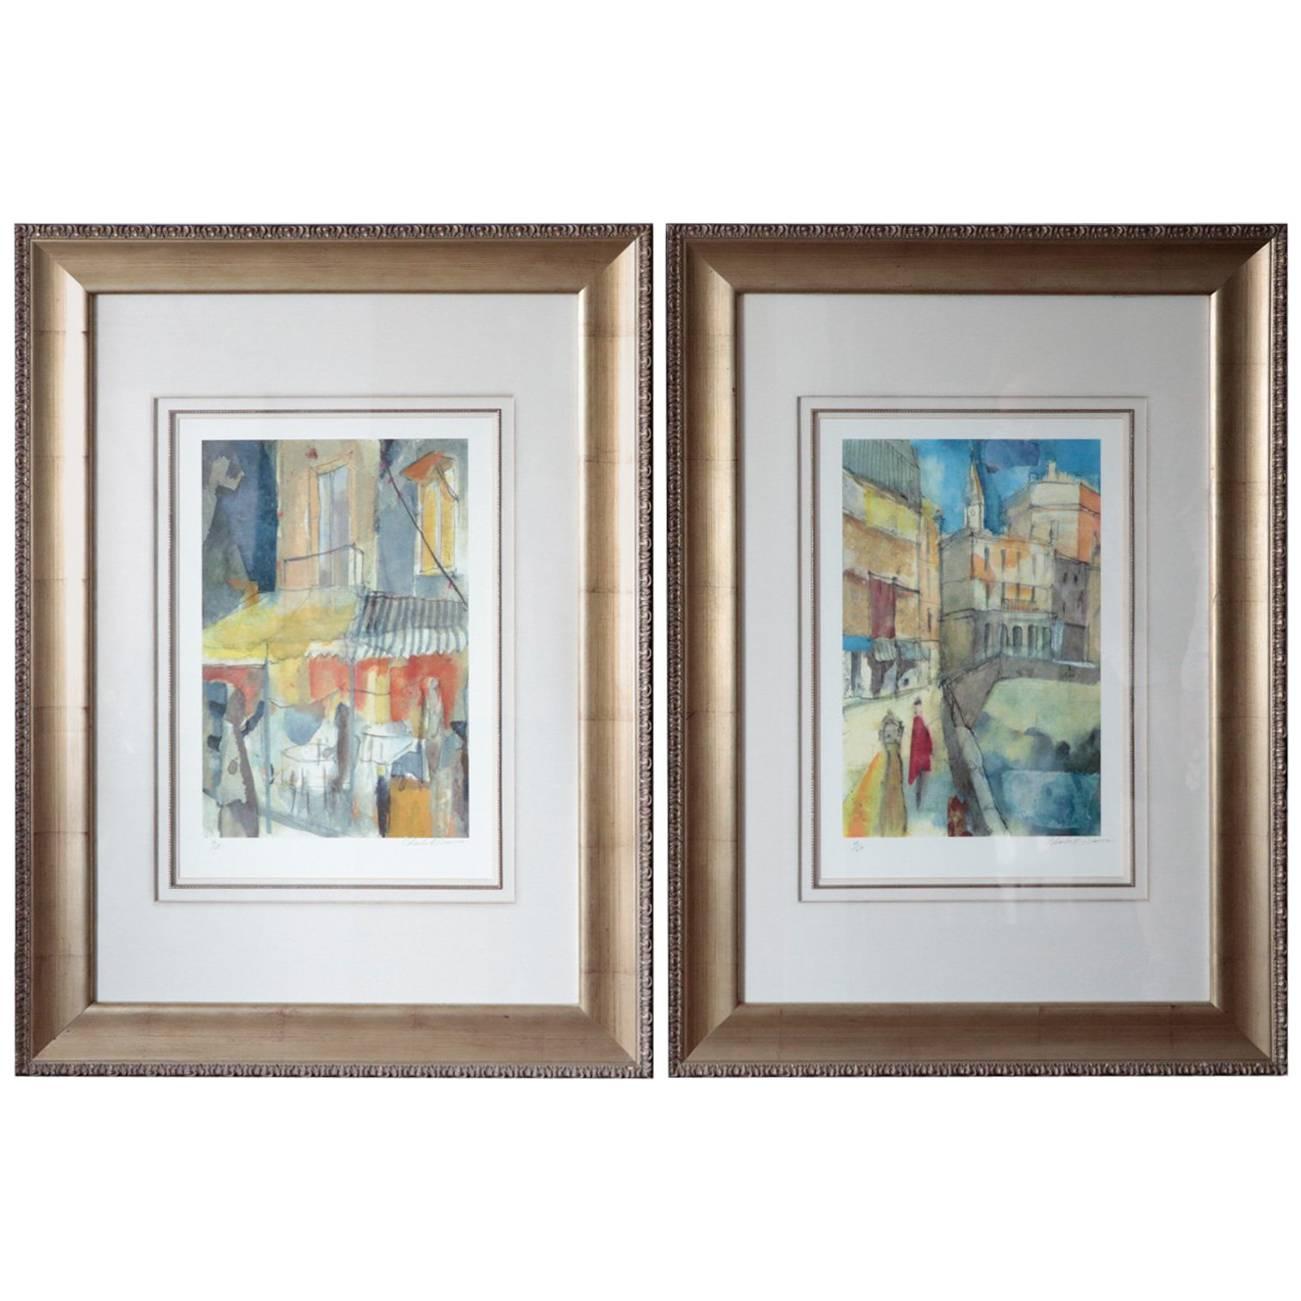 Signed Pair of Charles R Davies Colorful Scenes Art Window Looks and Inkempen For Sale